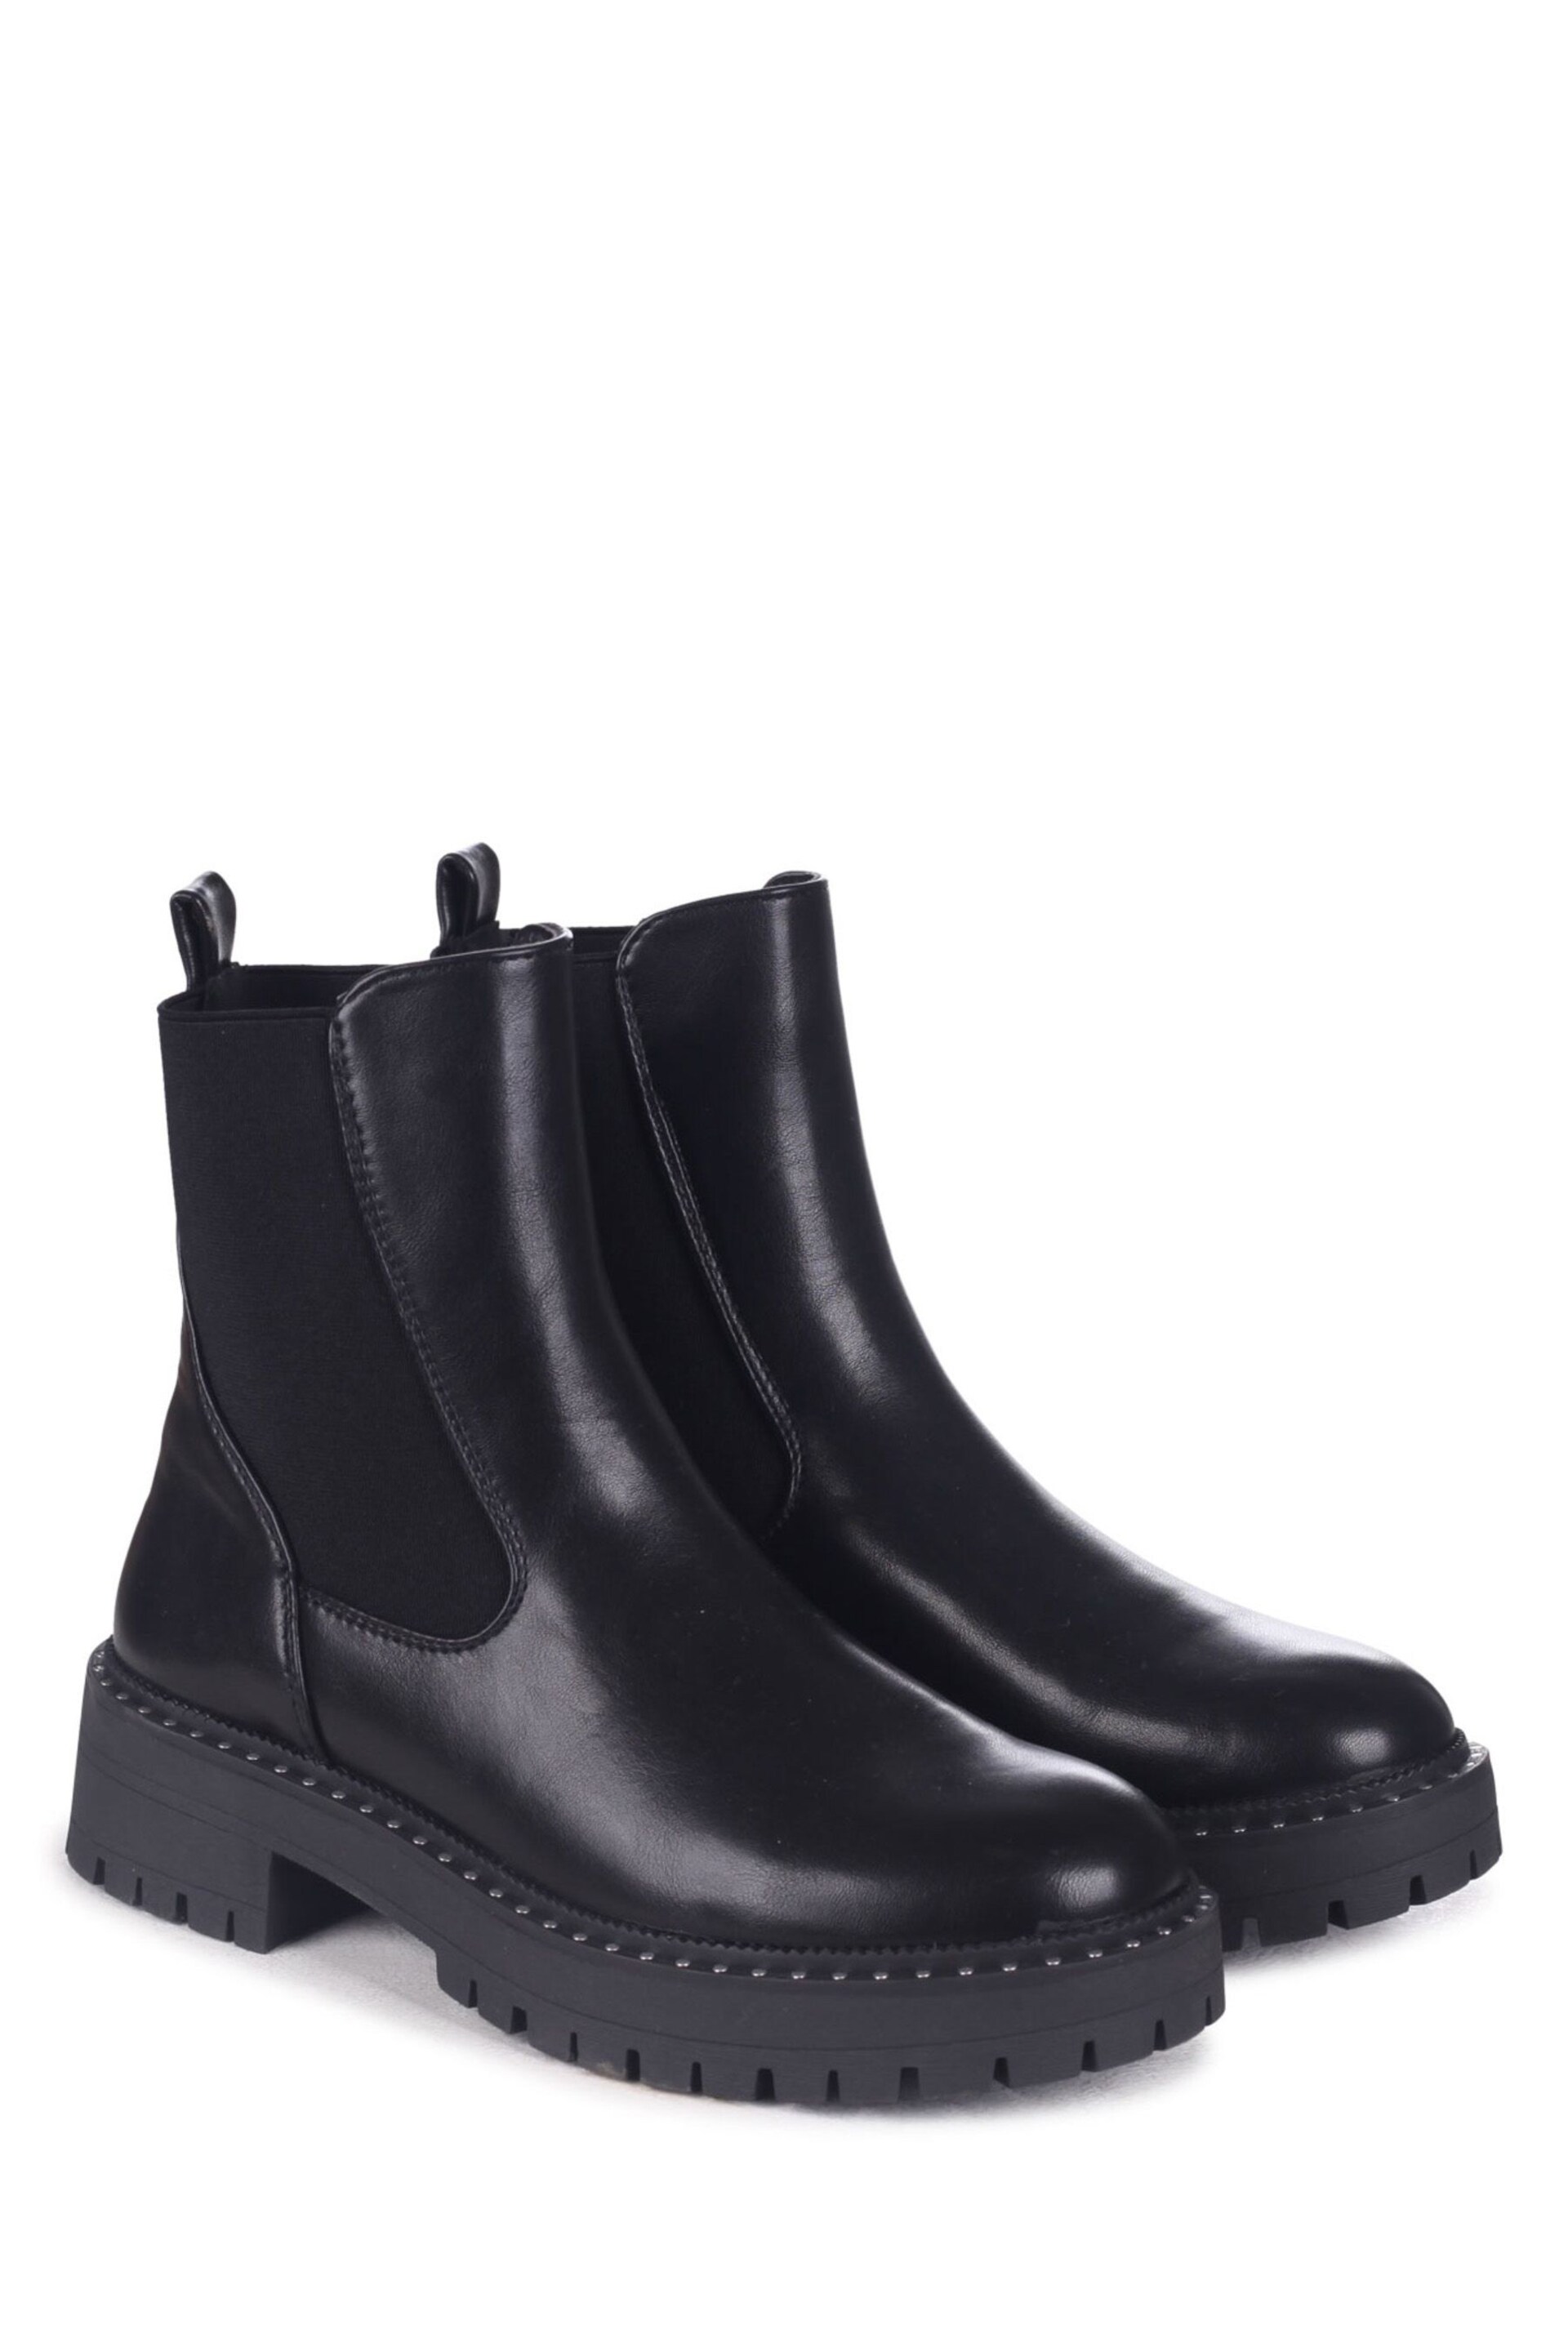 Linzi Black Faux Leather Andrea Soft Silver Stud Detail Sole Chelsea Boot - Image 3 of 5